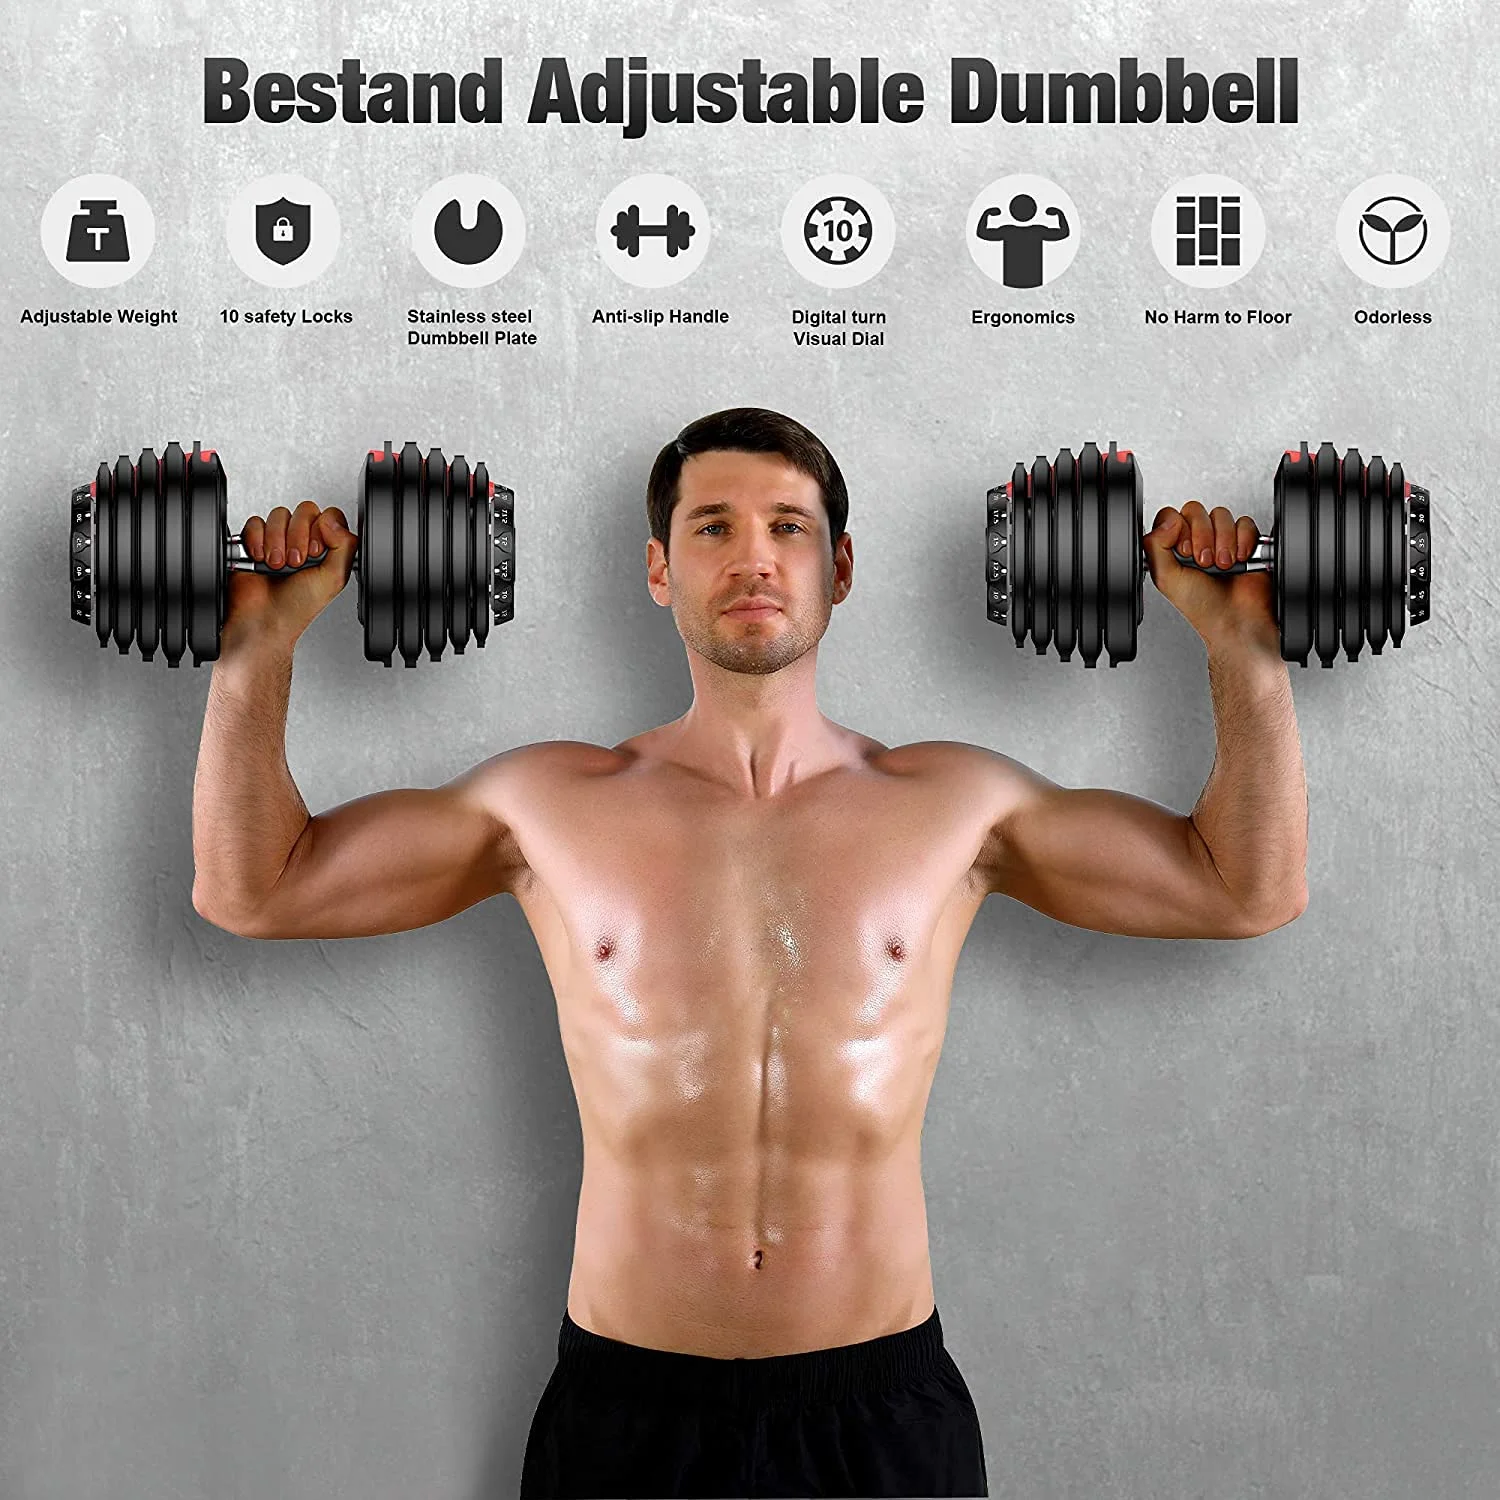 Full Body Workout Fitness Men And Women Black Anti-Slip Fast Adjust Weight Metal Handle Adjustable Dumbbell by Turning Handle